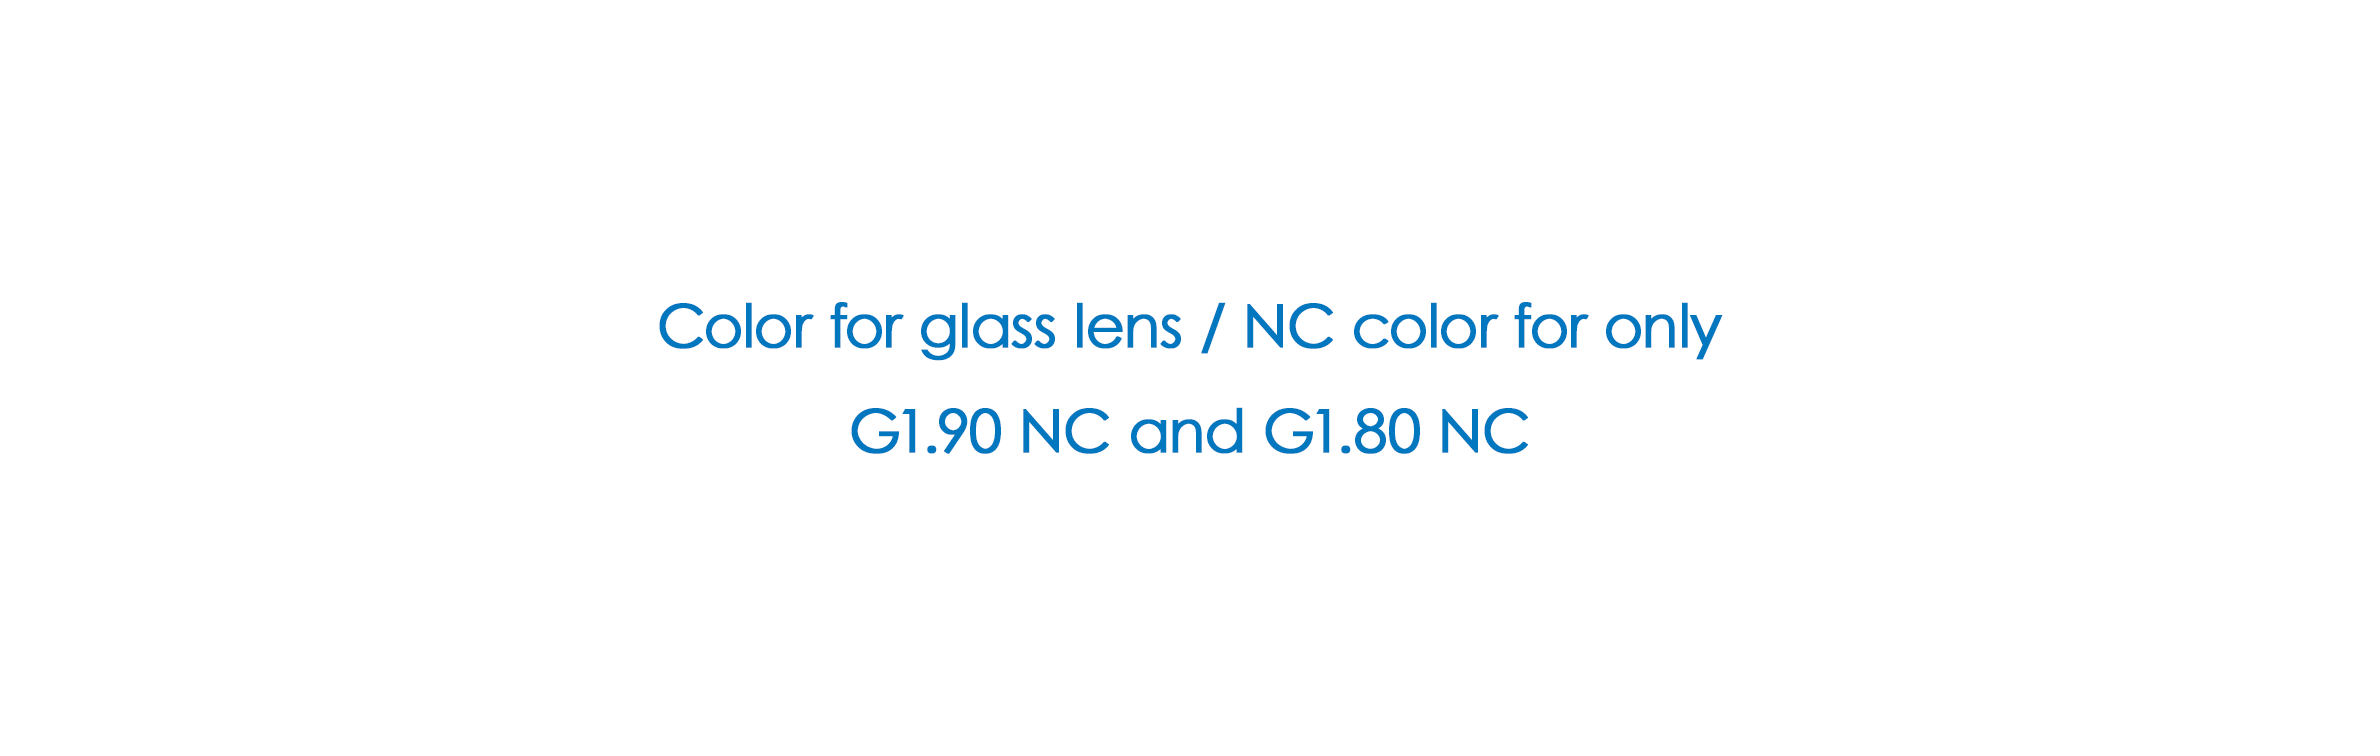 Color for glass lens / NC color for only G1.90 NC and G1.80 NC